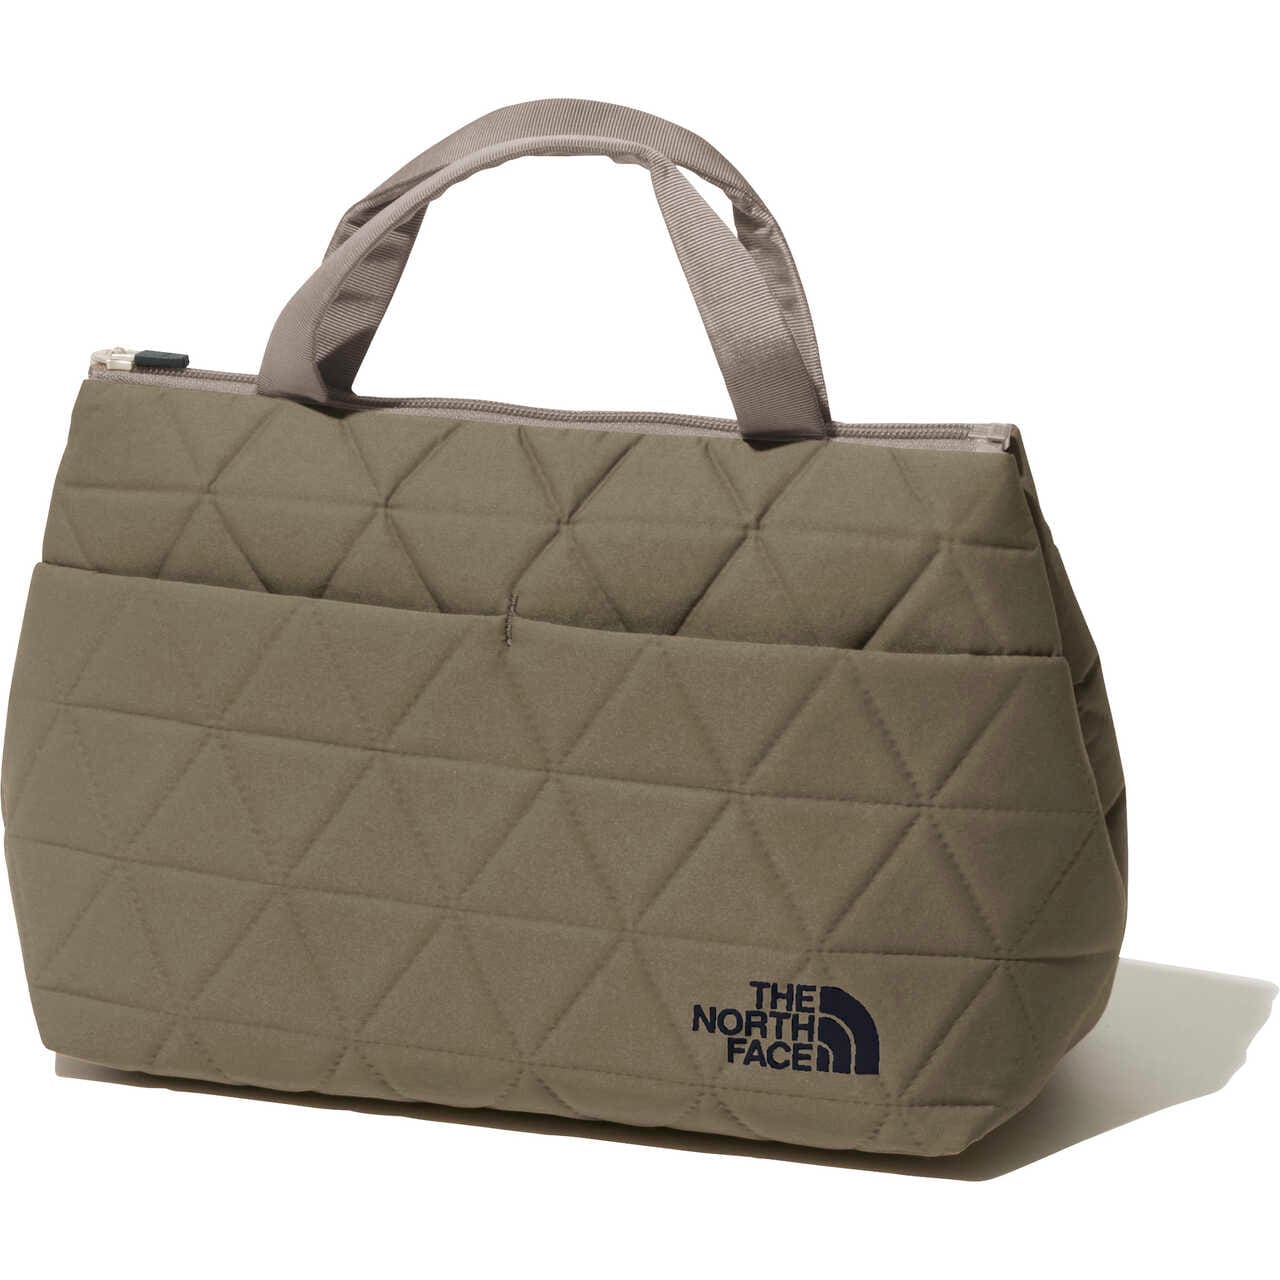 THE NORTH FACE Geoface Box Tote NM82283 - トートバッグ